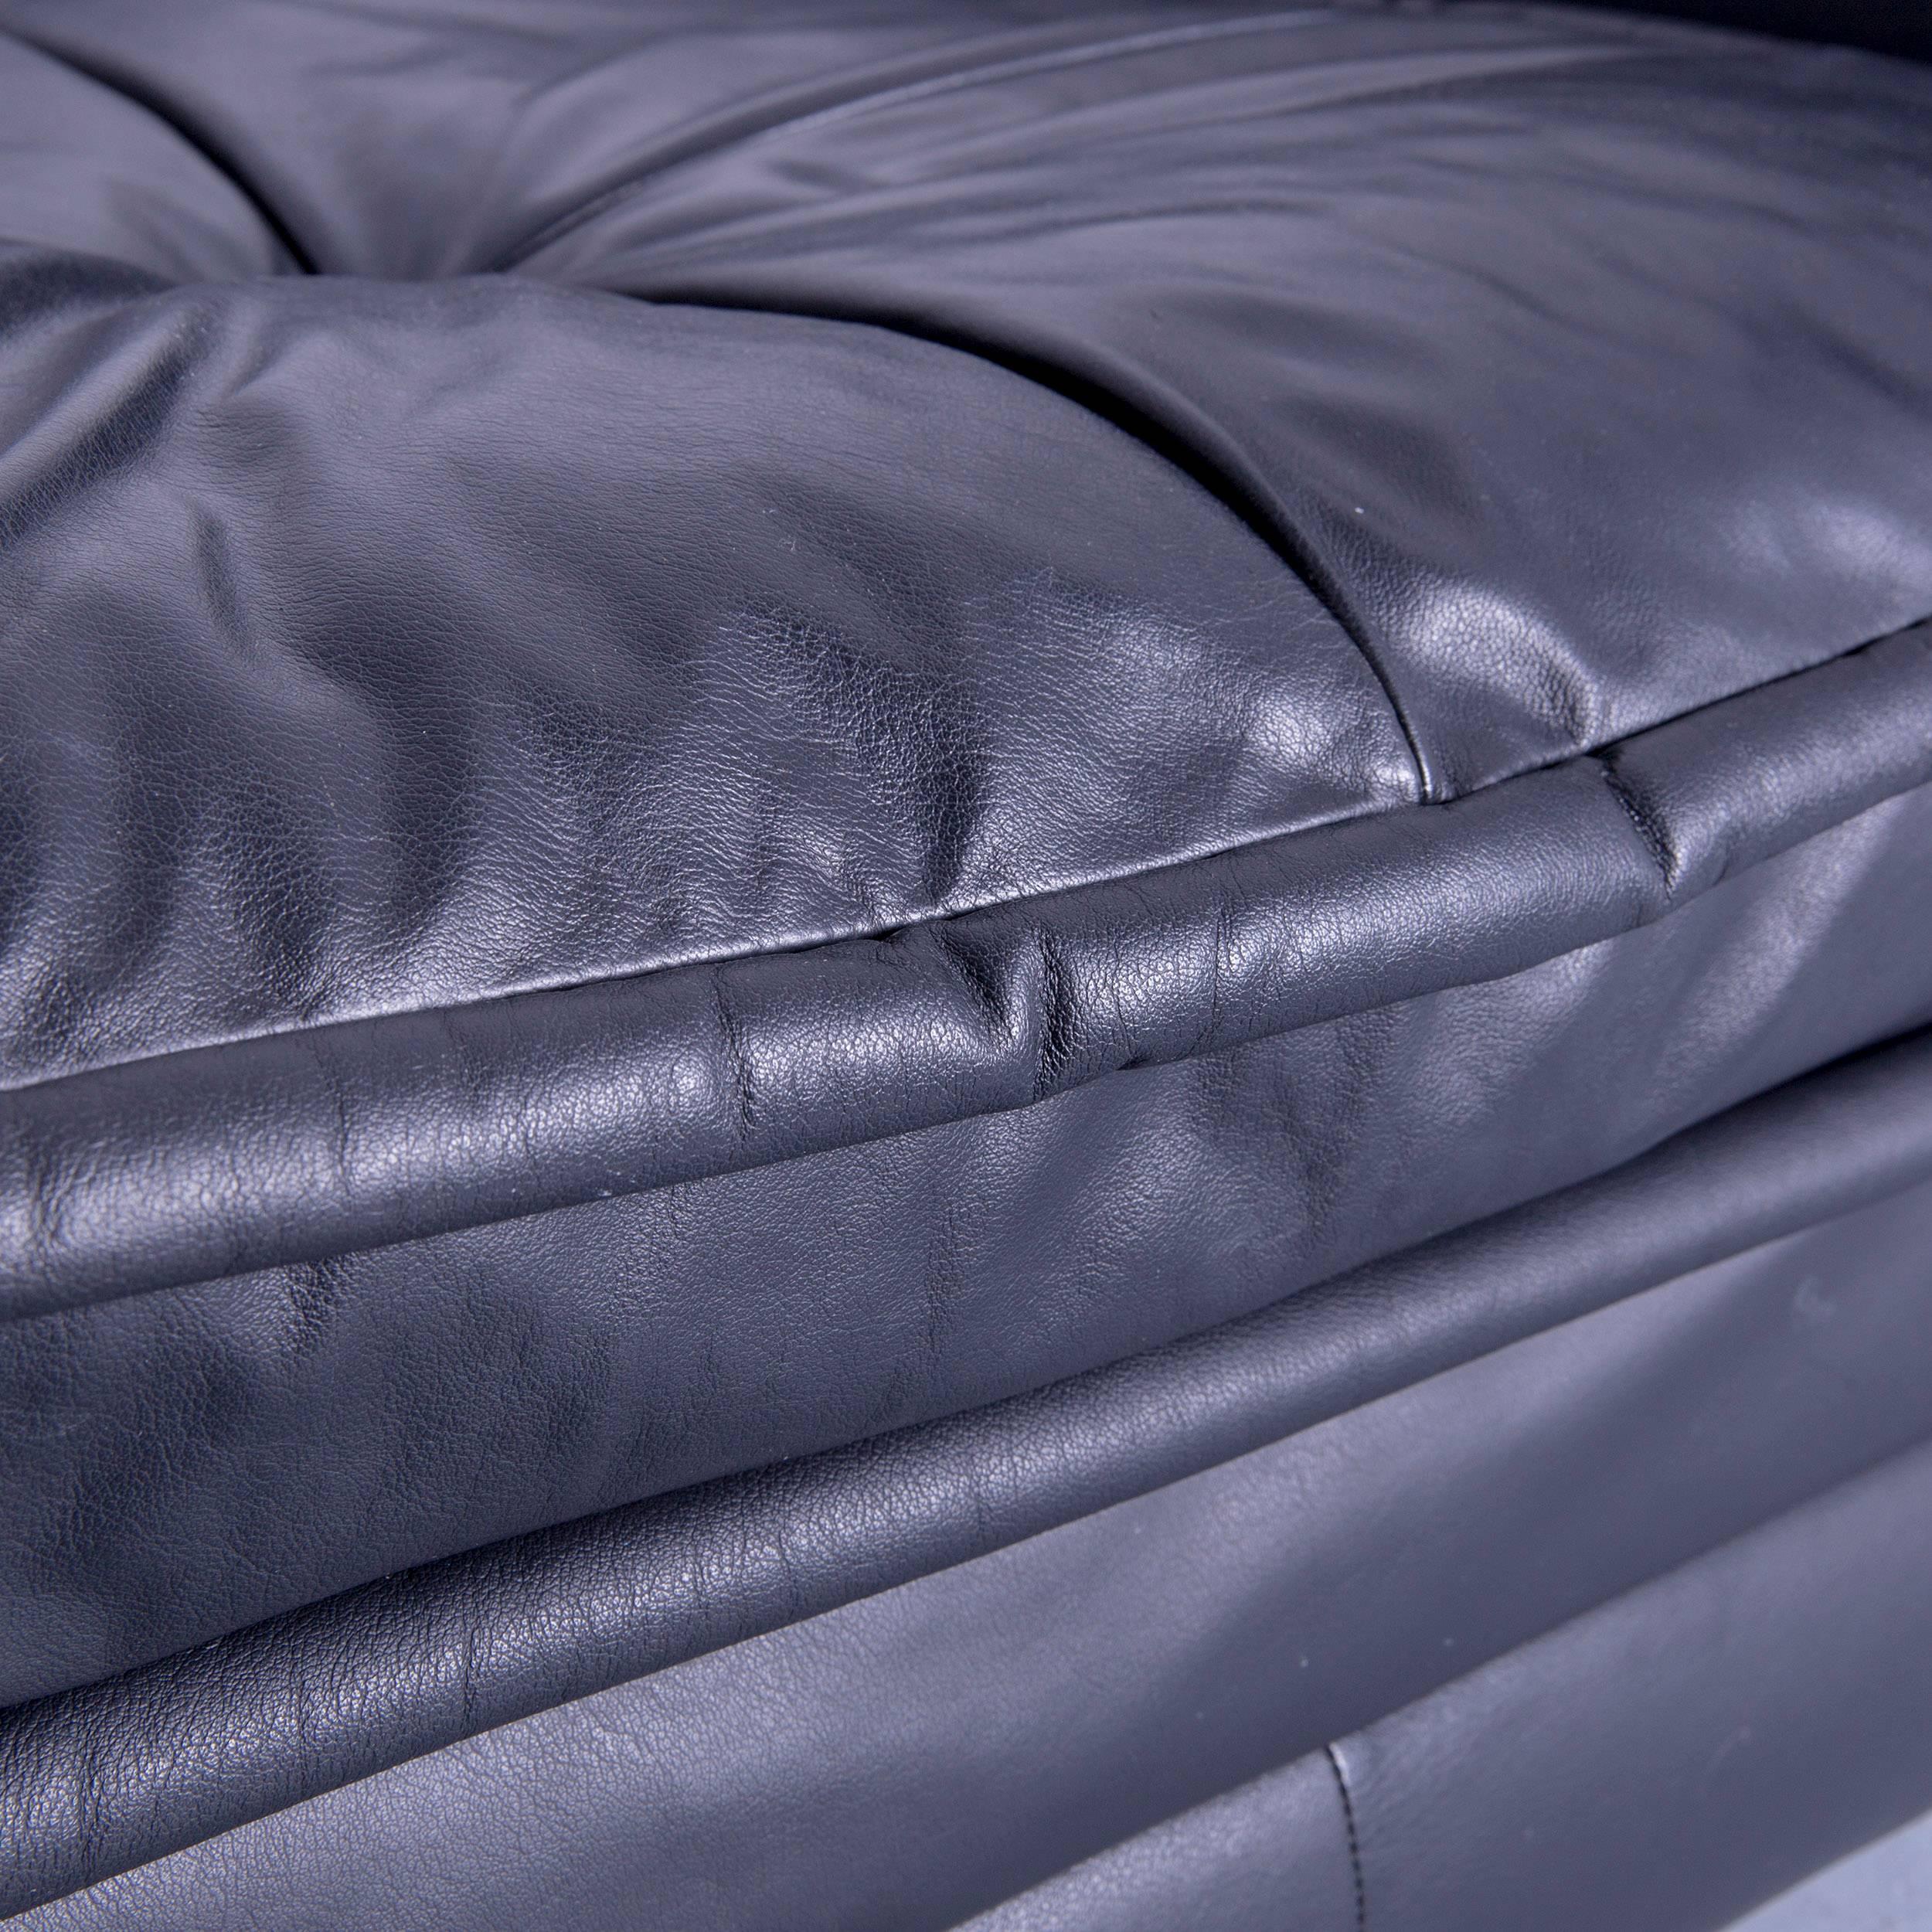 sleeping on leather couch